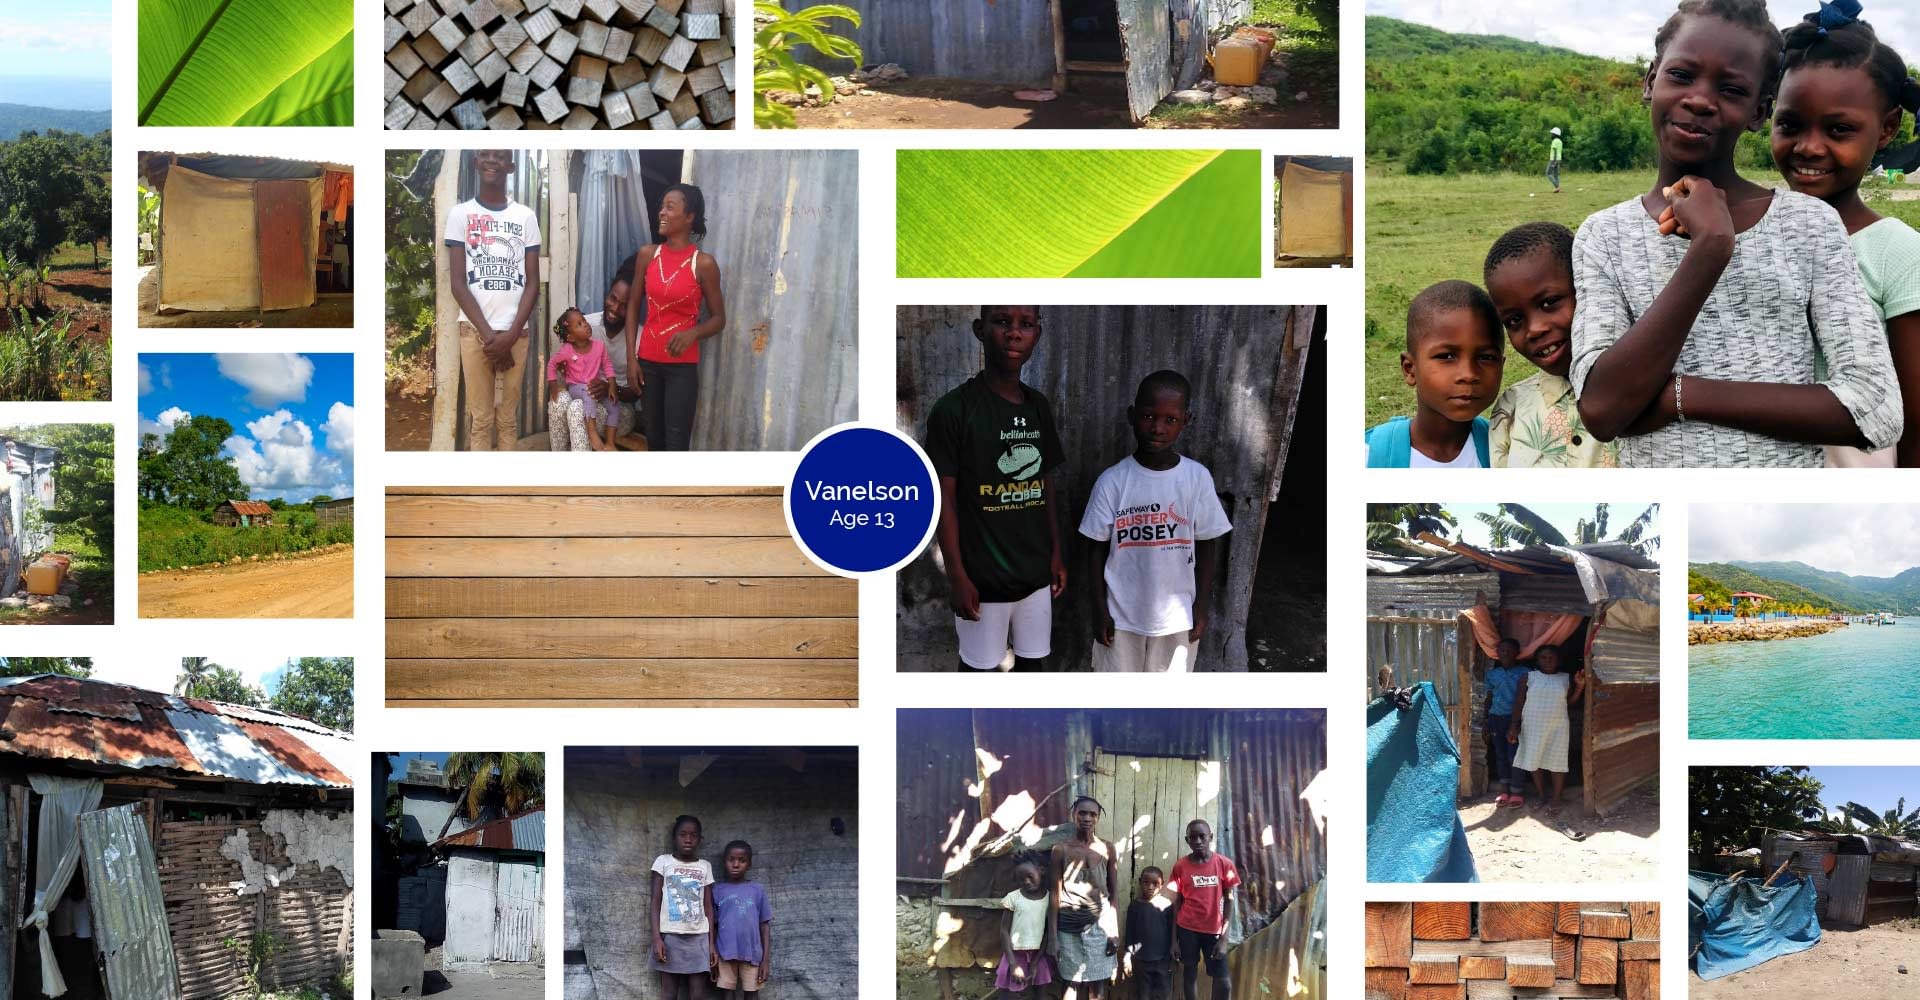 A photo collage of Vanelson's home and family in Haiti